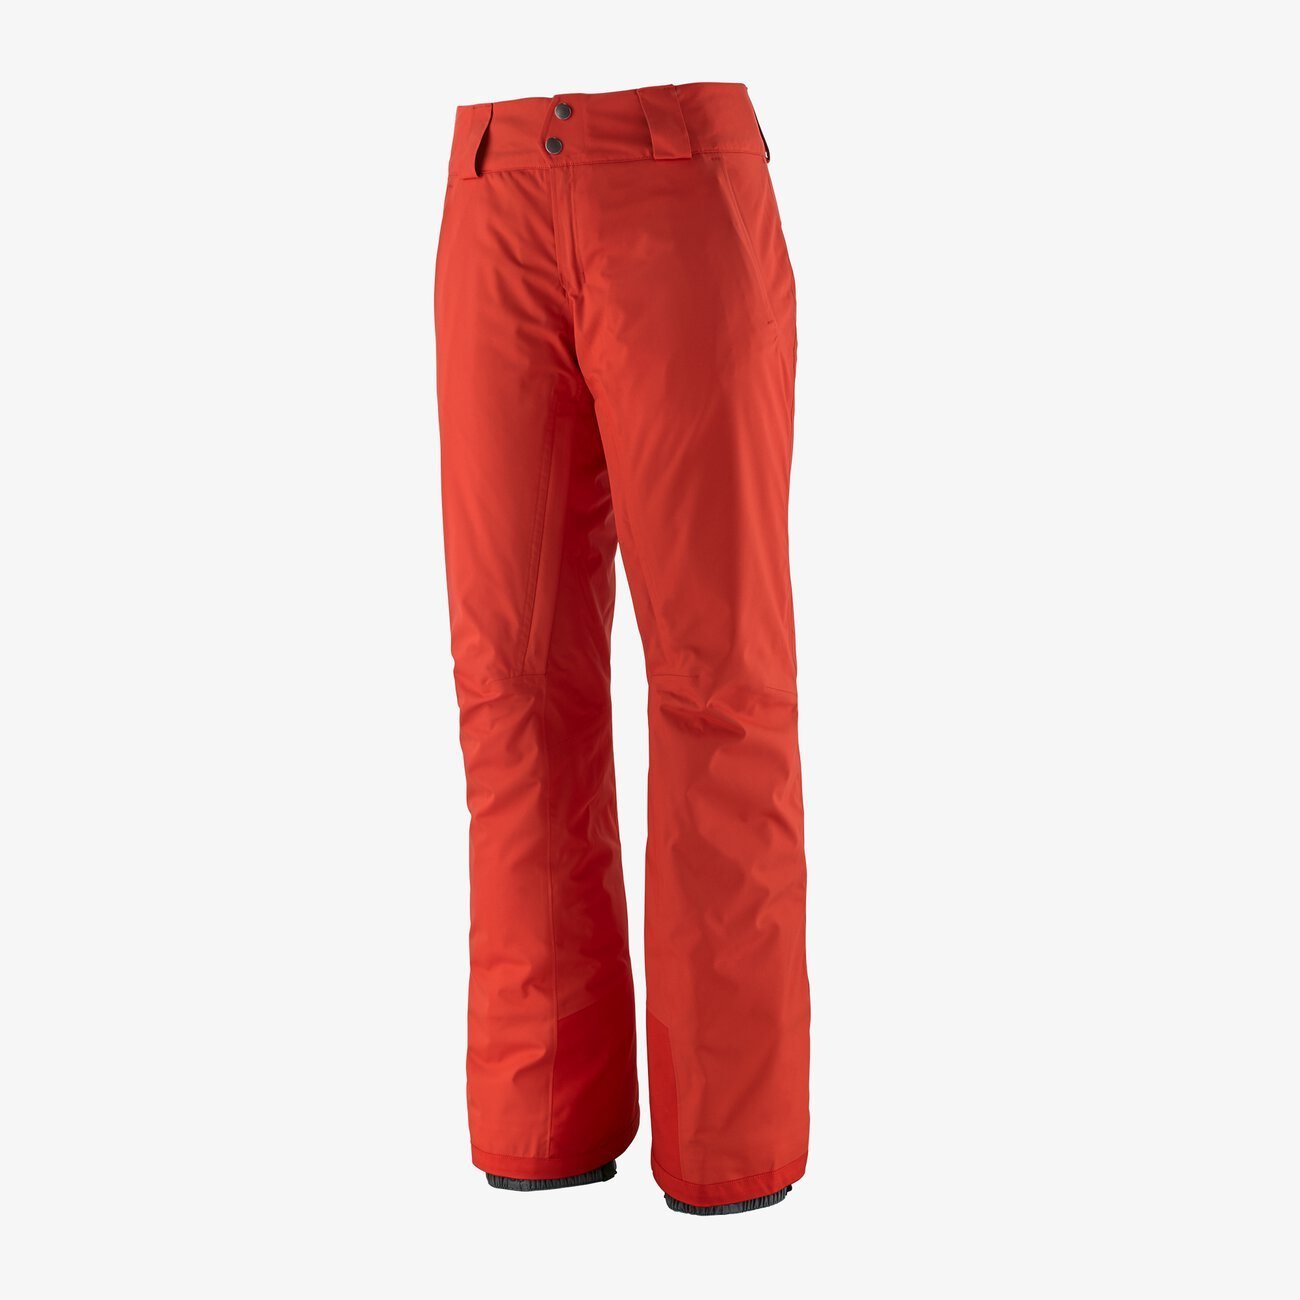 Patagonia Women's Insulated Snowbelle Pants - Reg, Catalan Coral / S